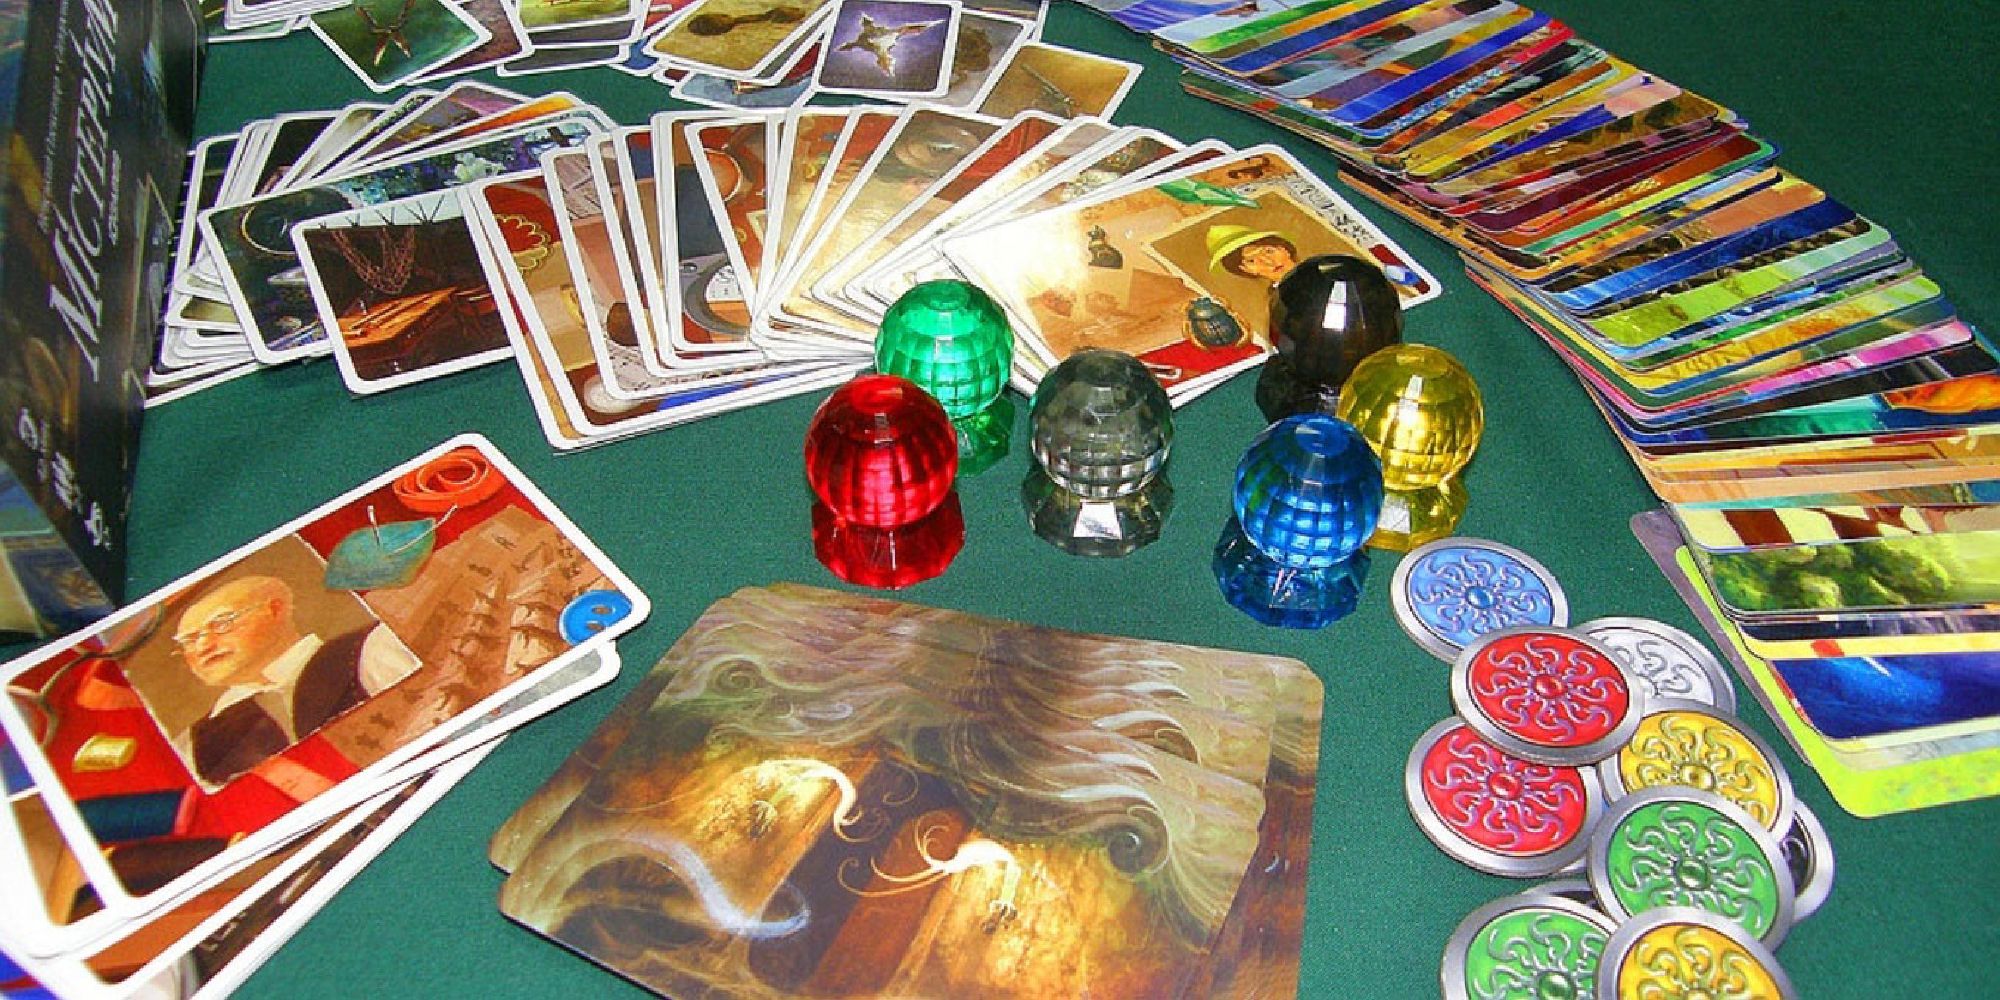 Cards, game pieces, and tokens for the game Mysterium laid out on a table